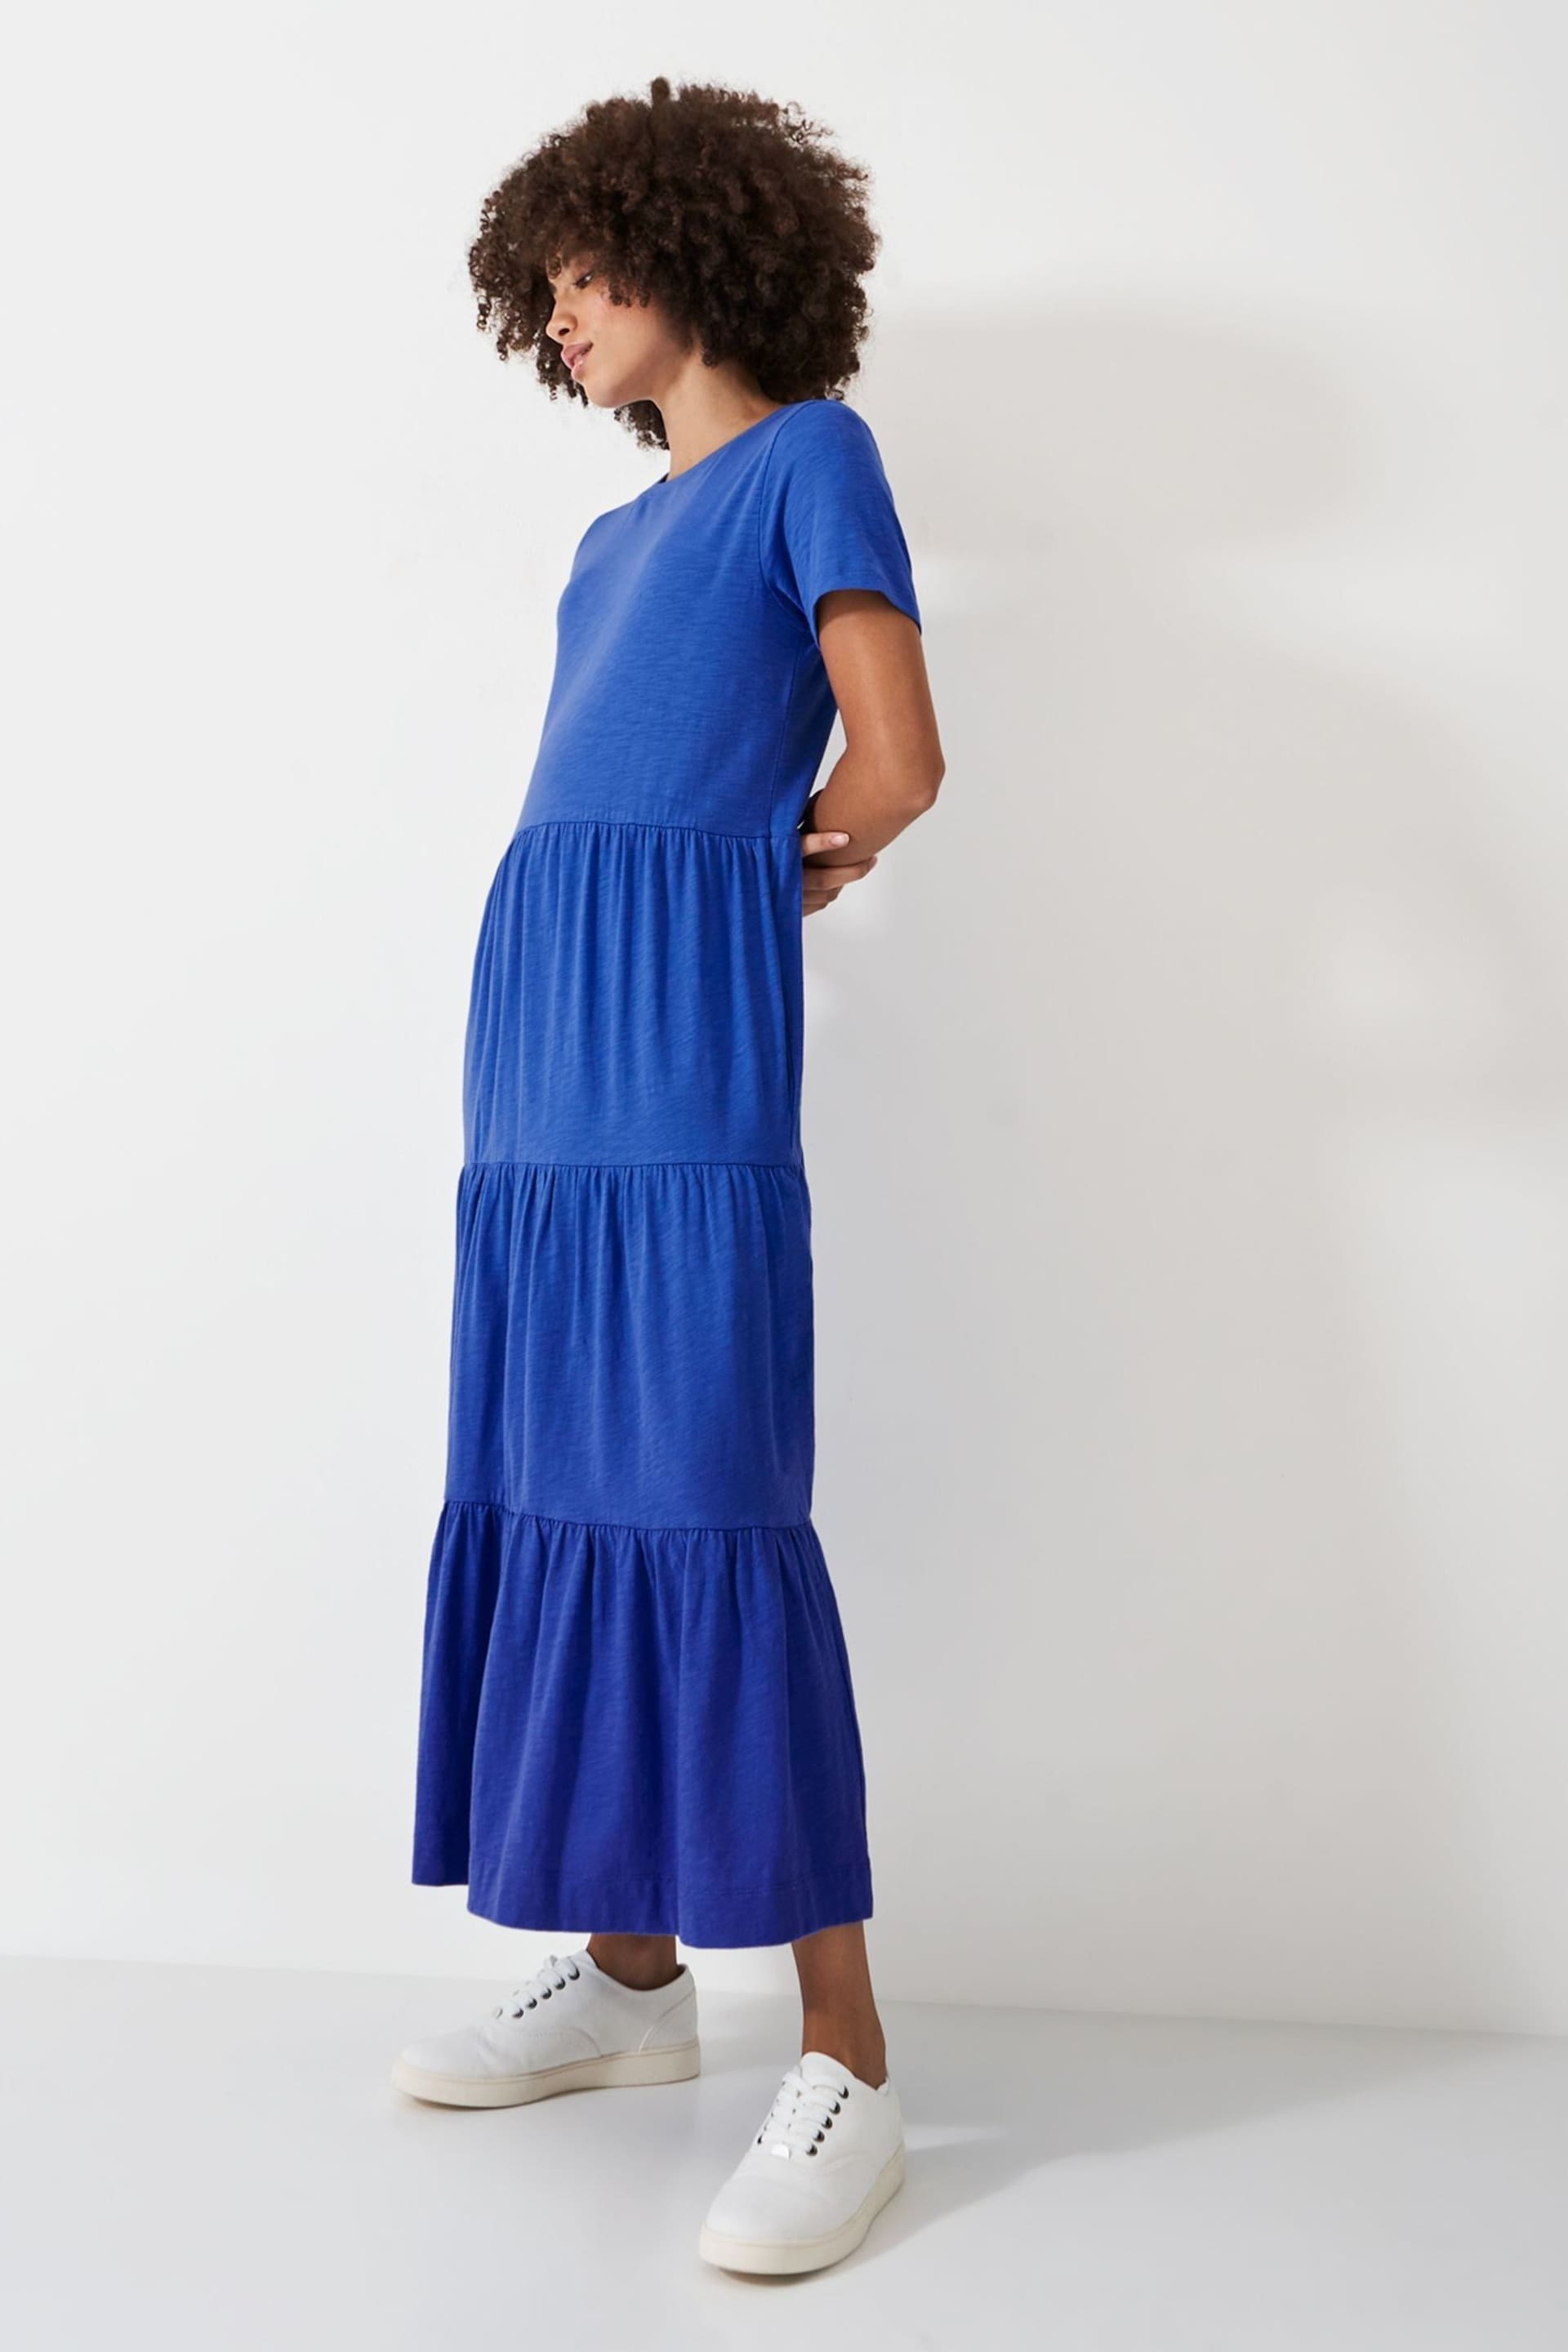 Crew Clothing Short Sleeve Tiered Cotton Jersey Dress - Image 3 of 5